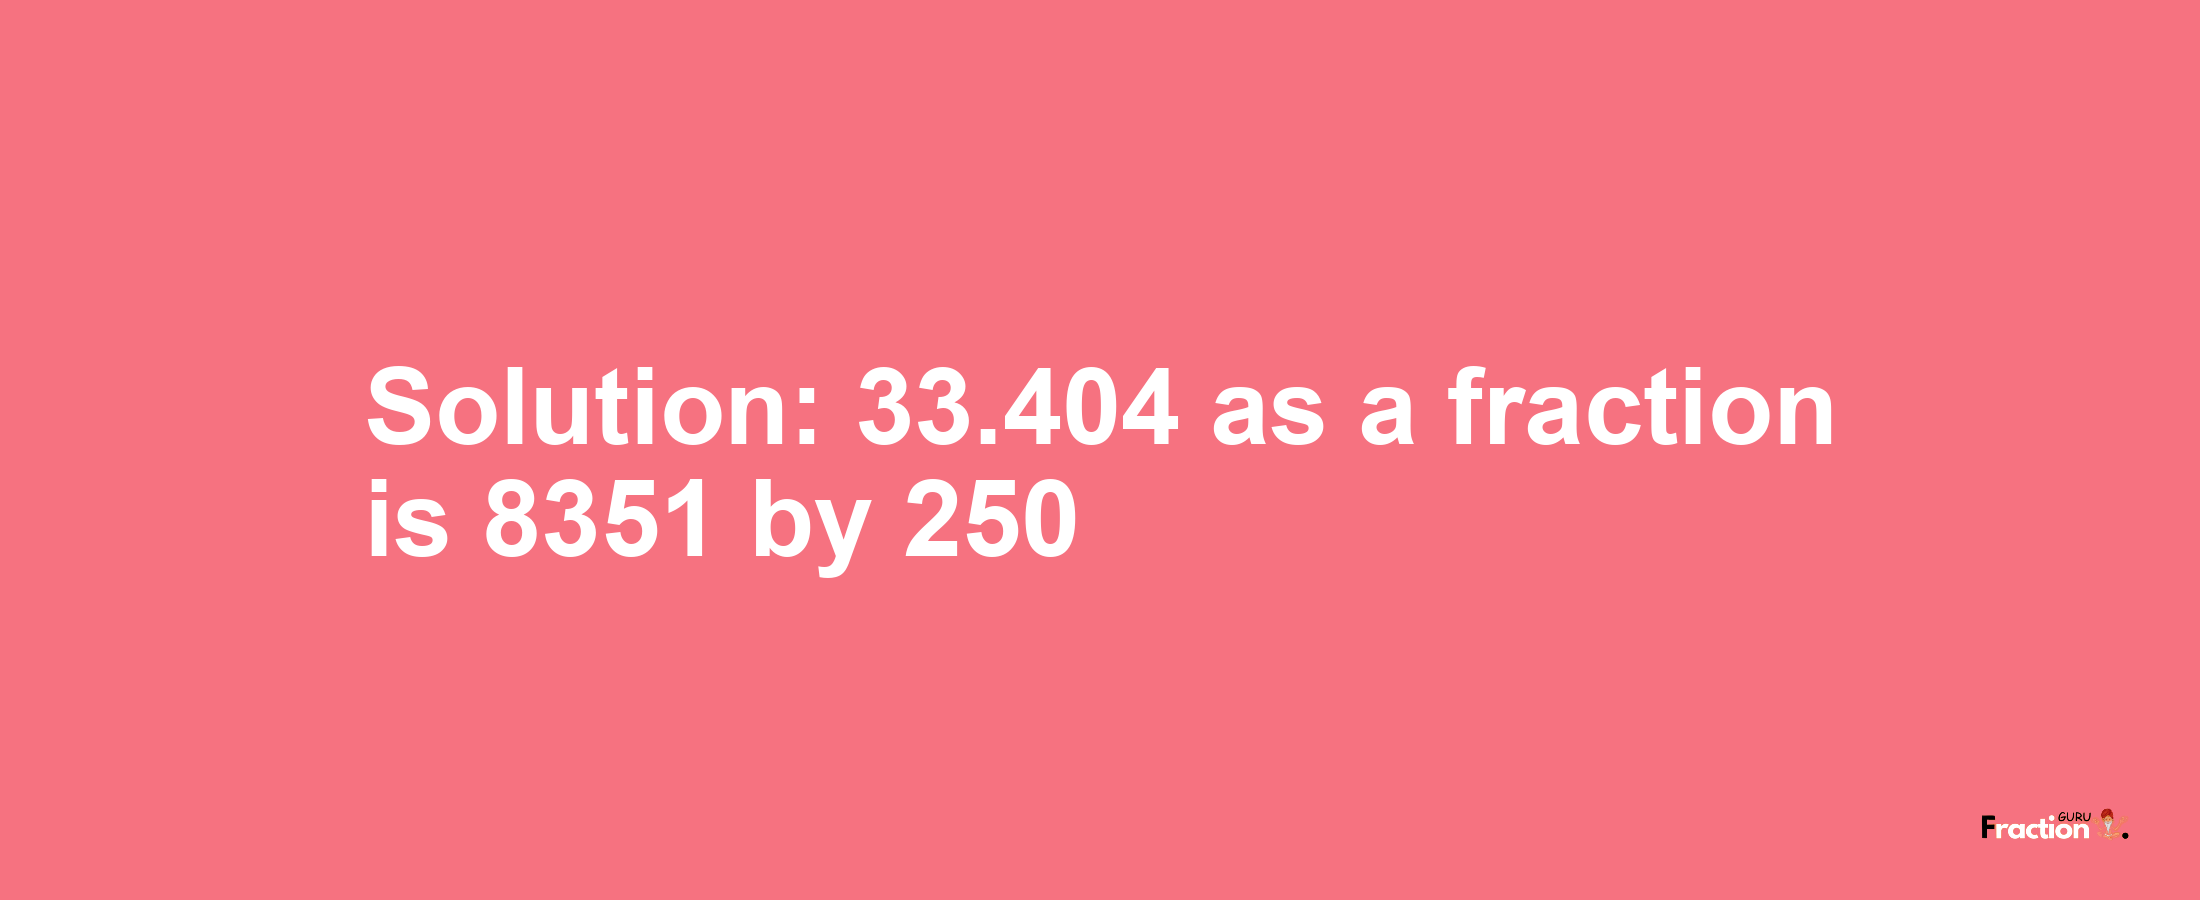 Solution:33.404 as a fraction is 8351/250